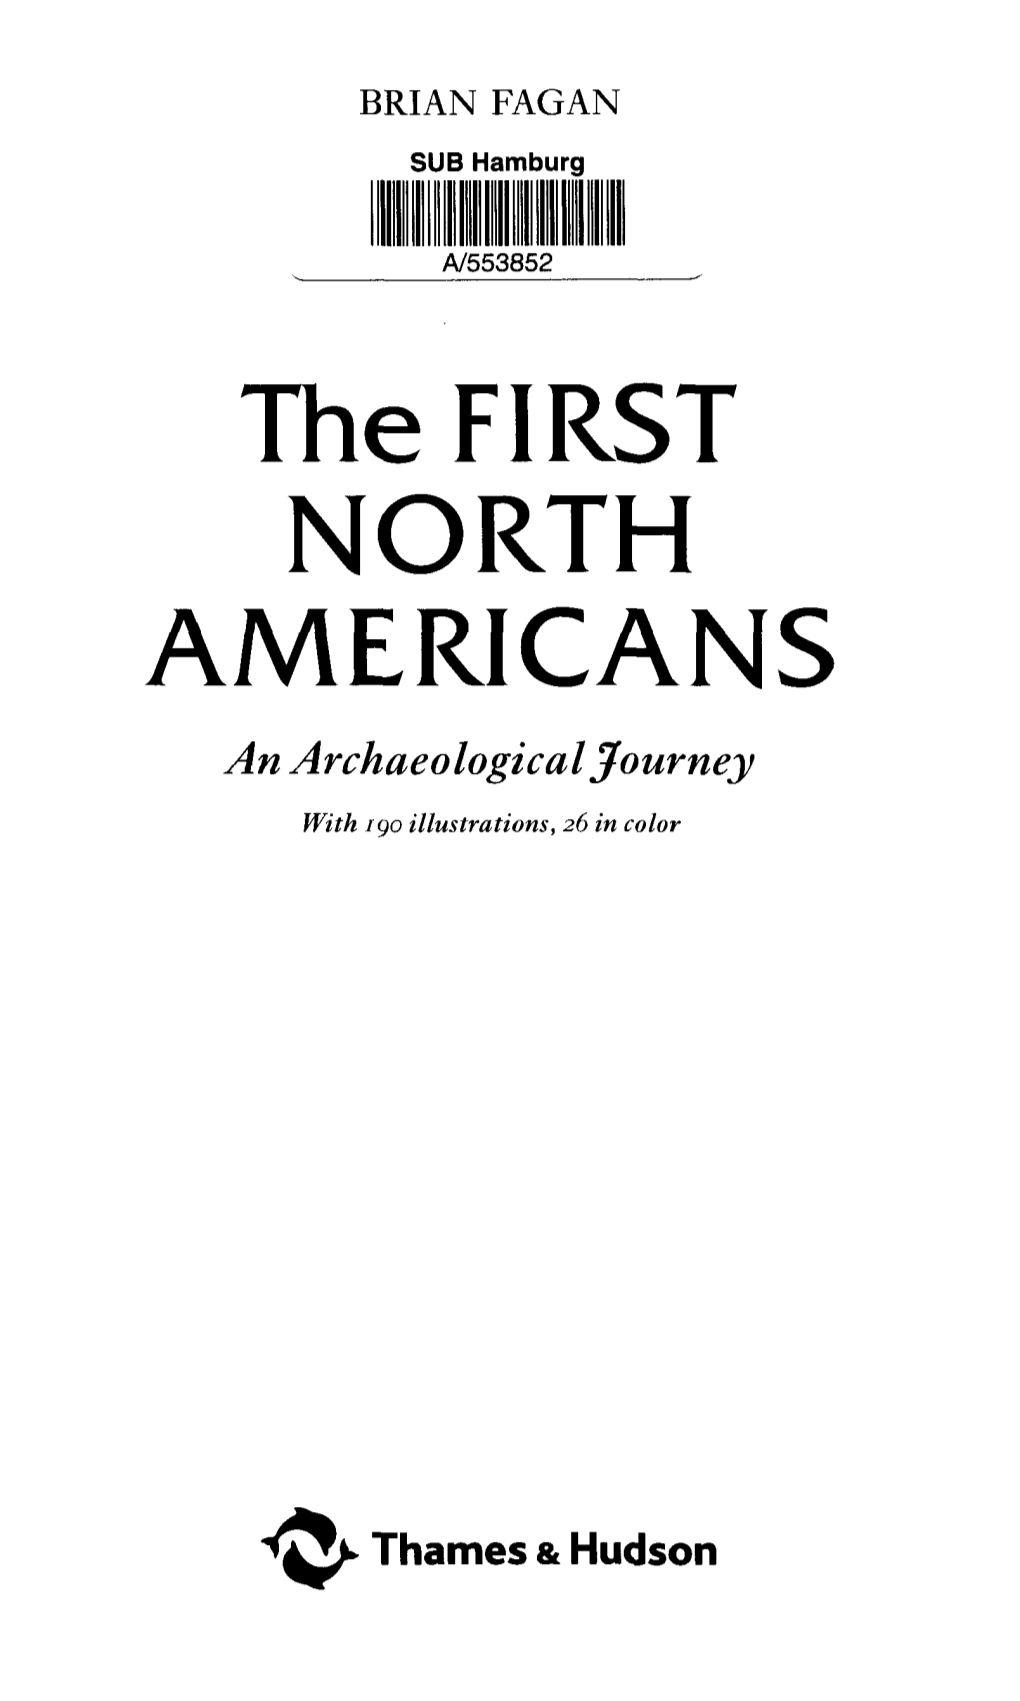 The FIRST NORTH AMERICANS an Archaeological Journey with I Go Illustrations, 26 in Color